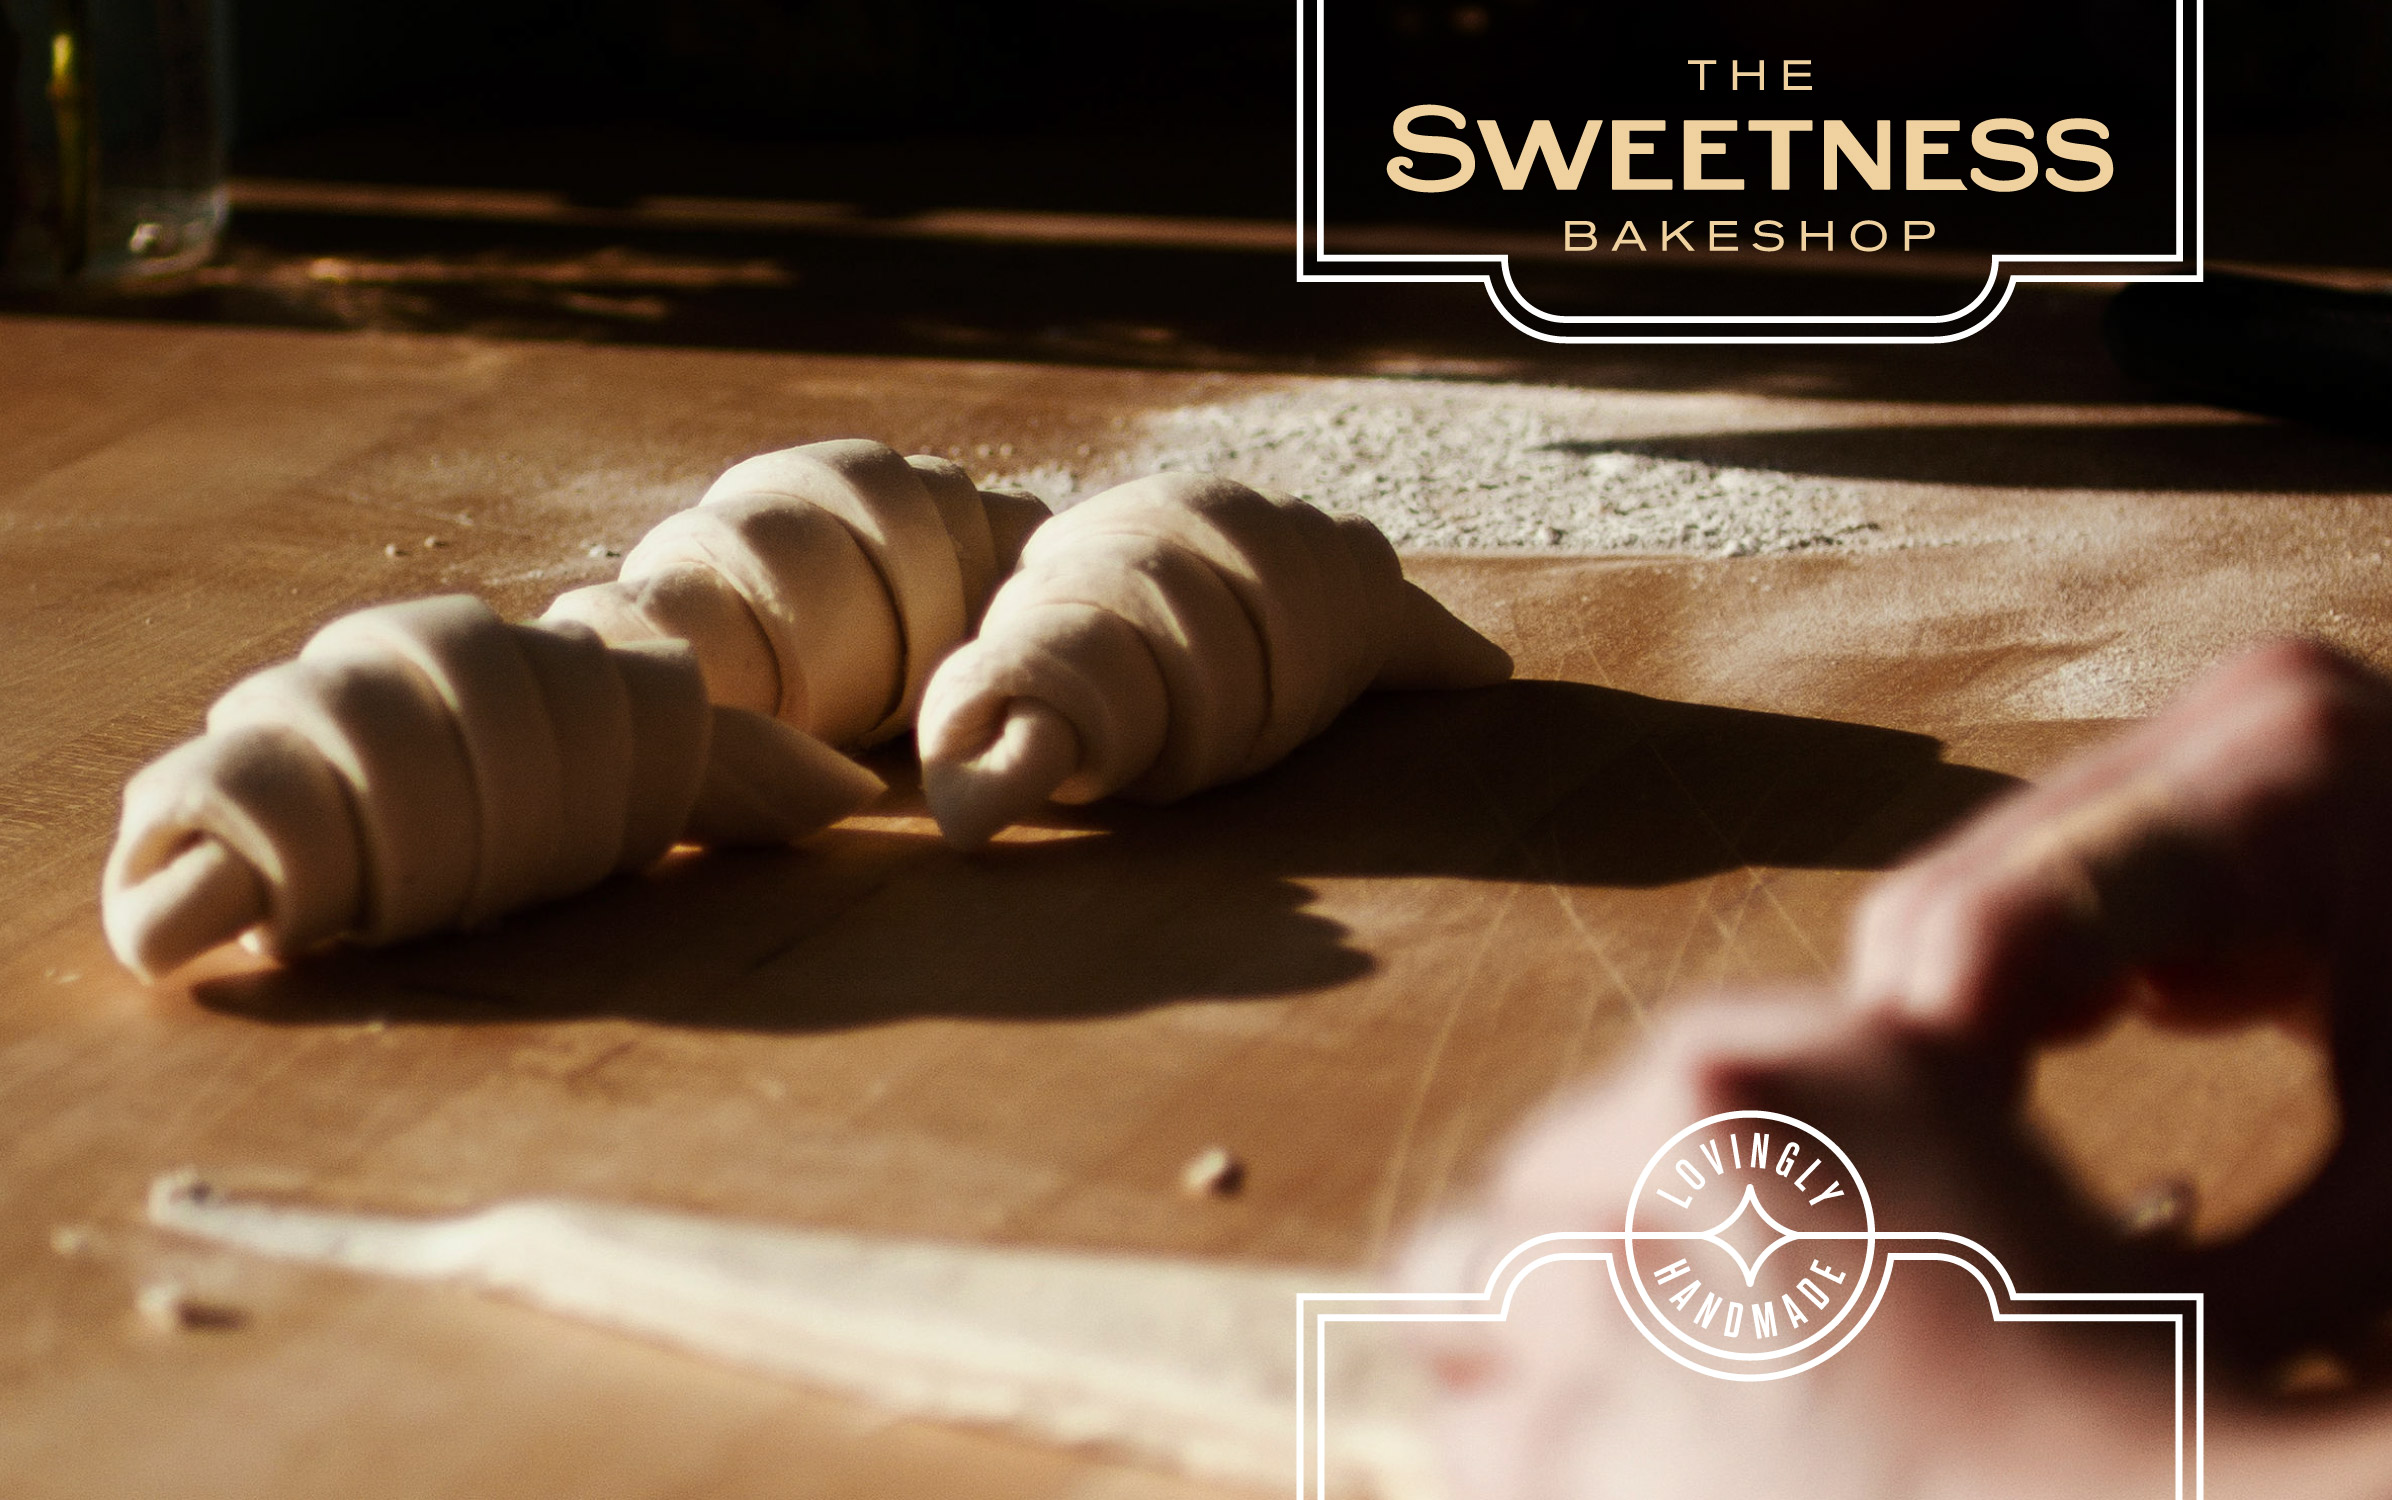 The Sweetness Bakeshop logo and croissants being rolled